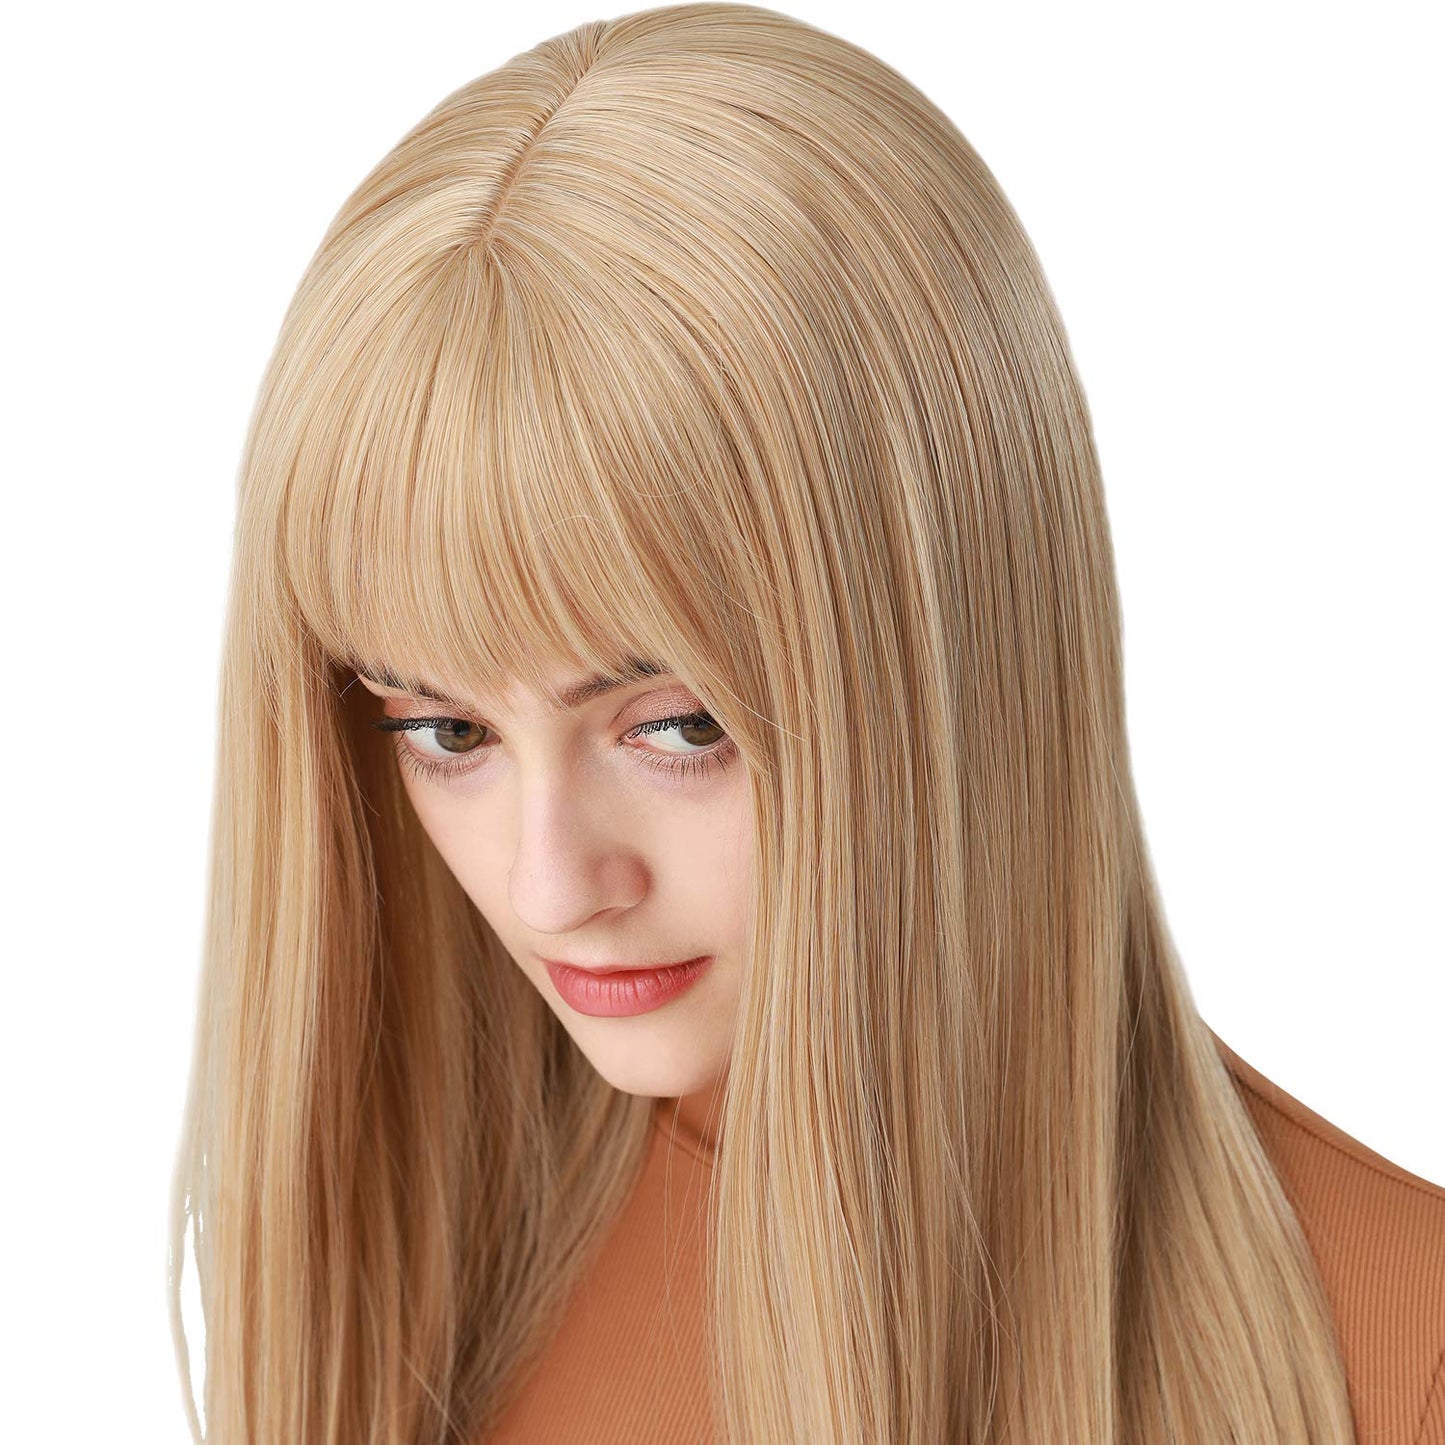 Lush Locks A Long Straight Wigs Blonde Synthetic Hair with Bangs for Women.